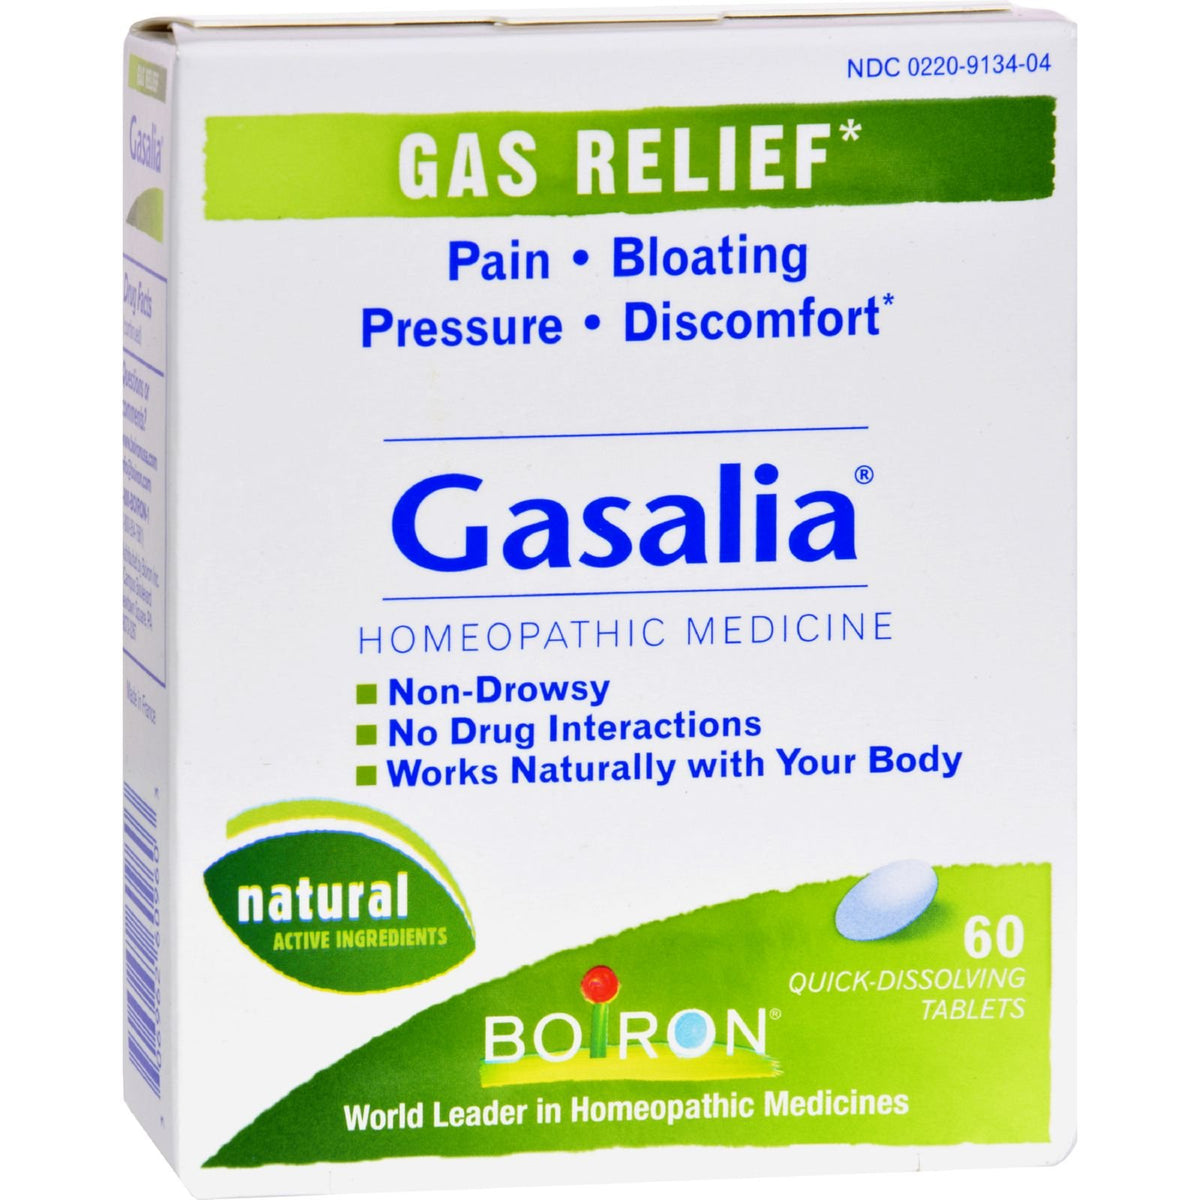 Boiron Gasalia - Gas Relief - Homeopathic - all Natural - 60 Tablets